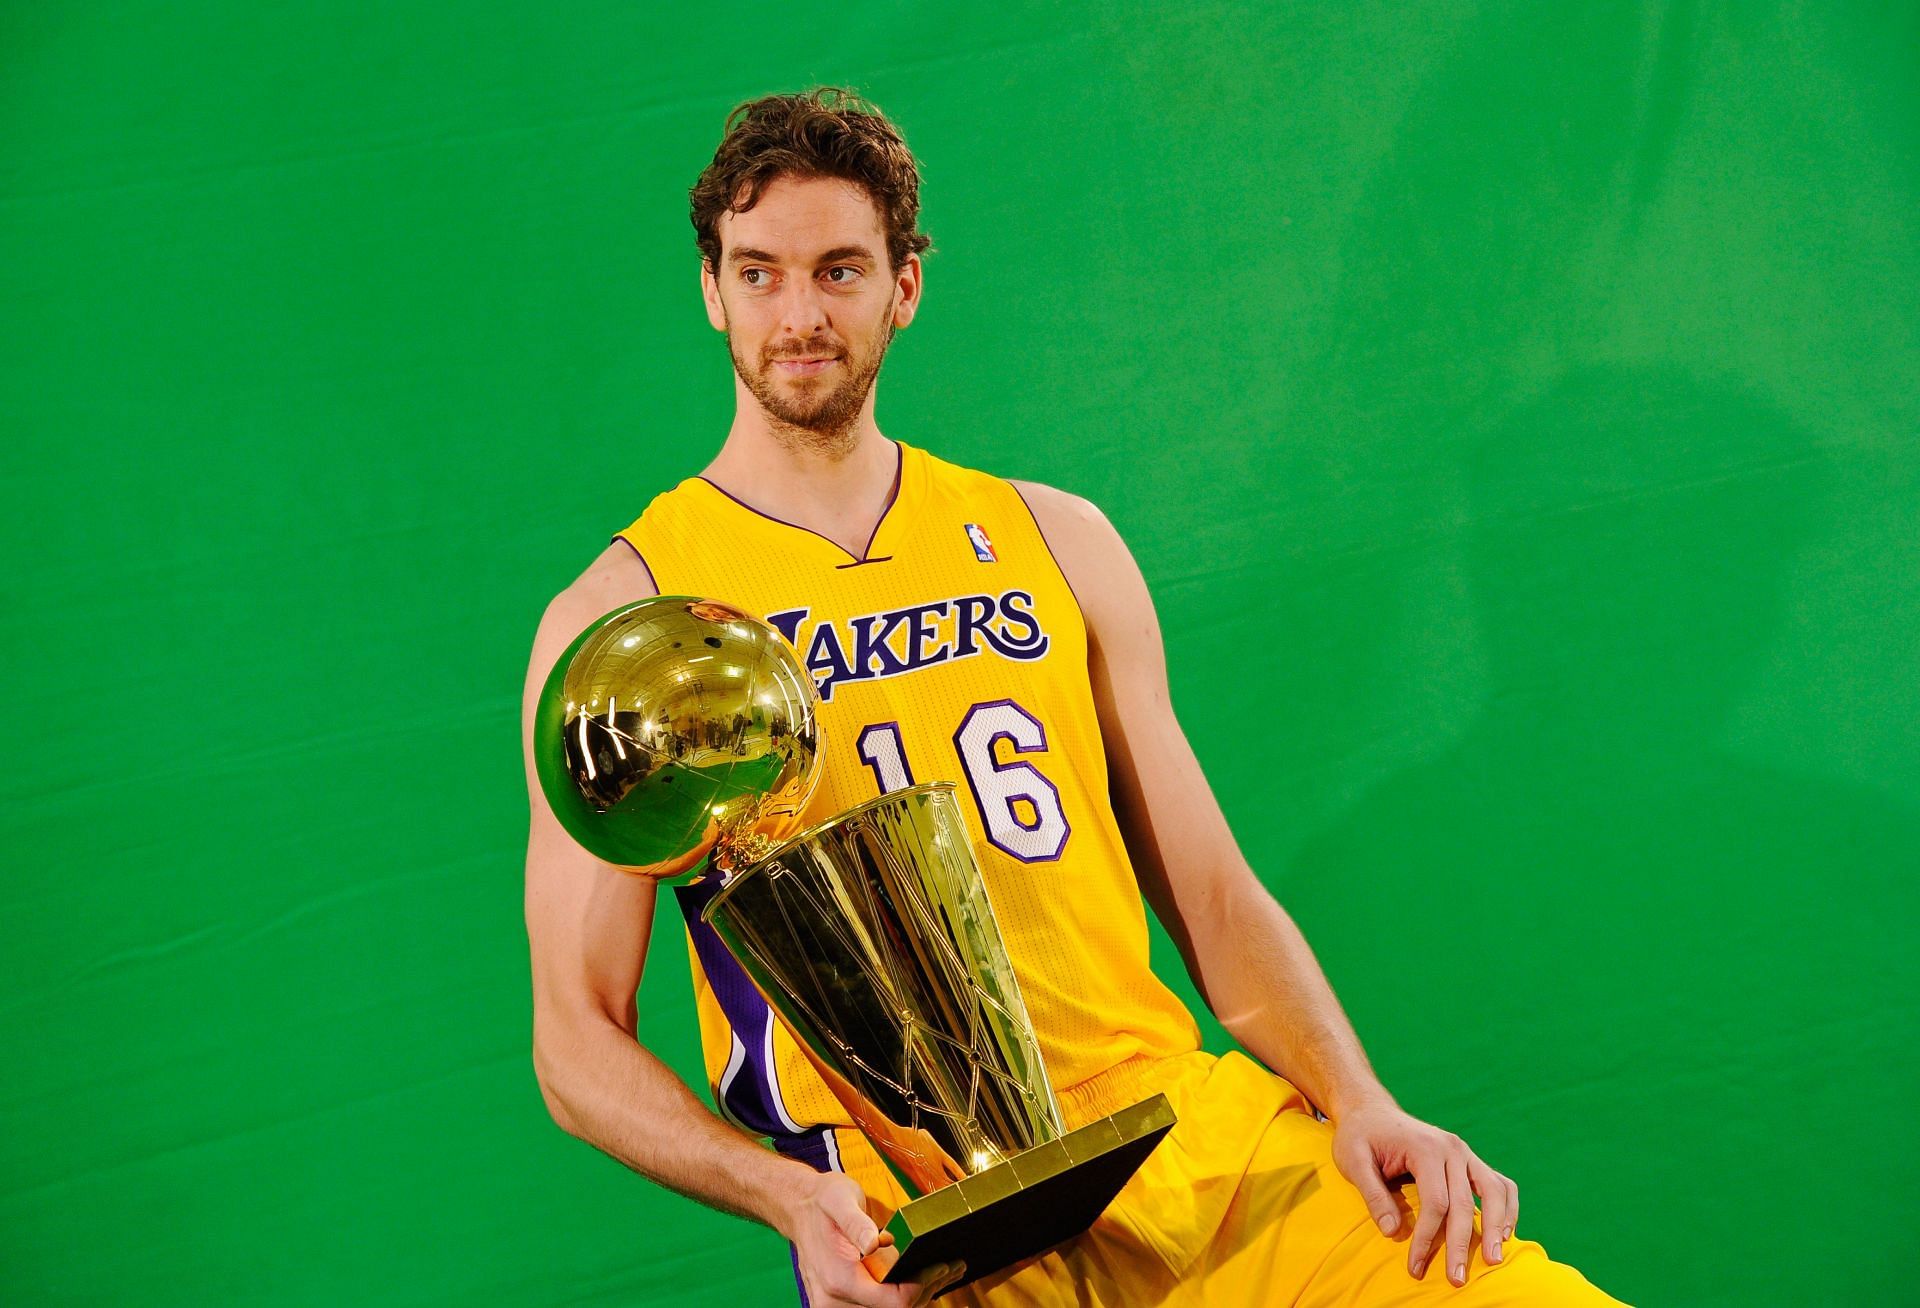 Los Angeles Lakers star Paul Gasol with the championship